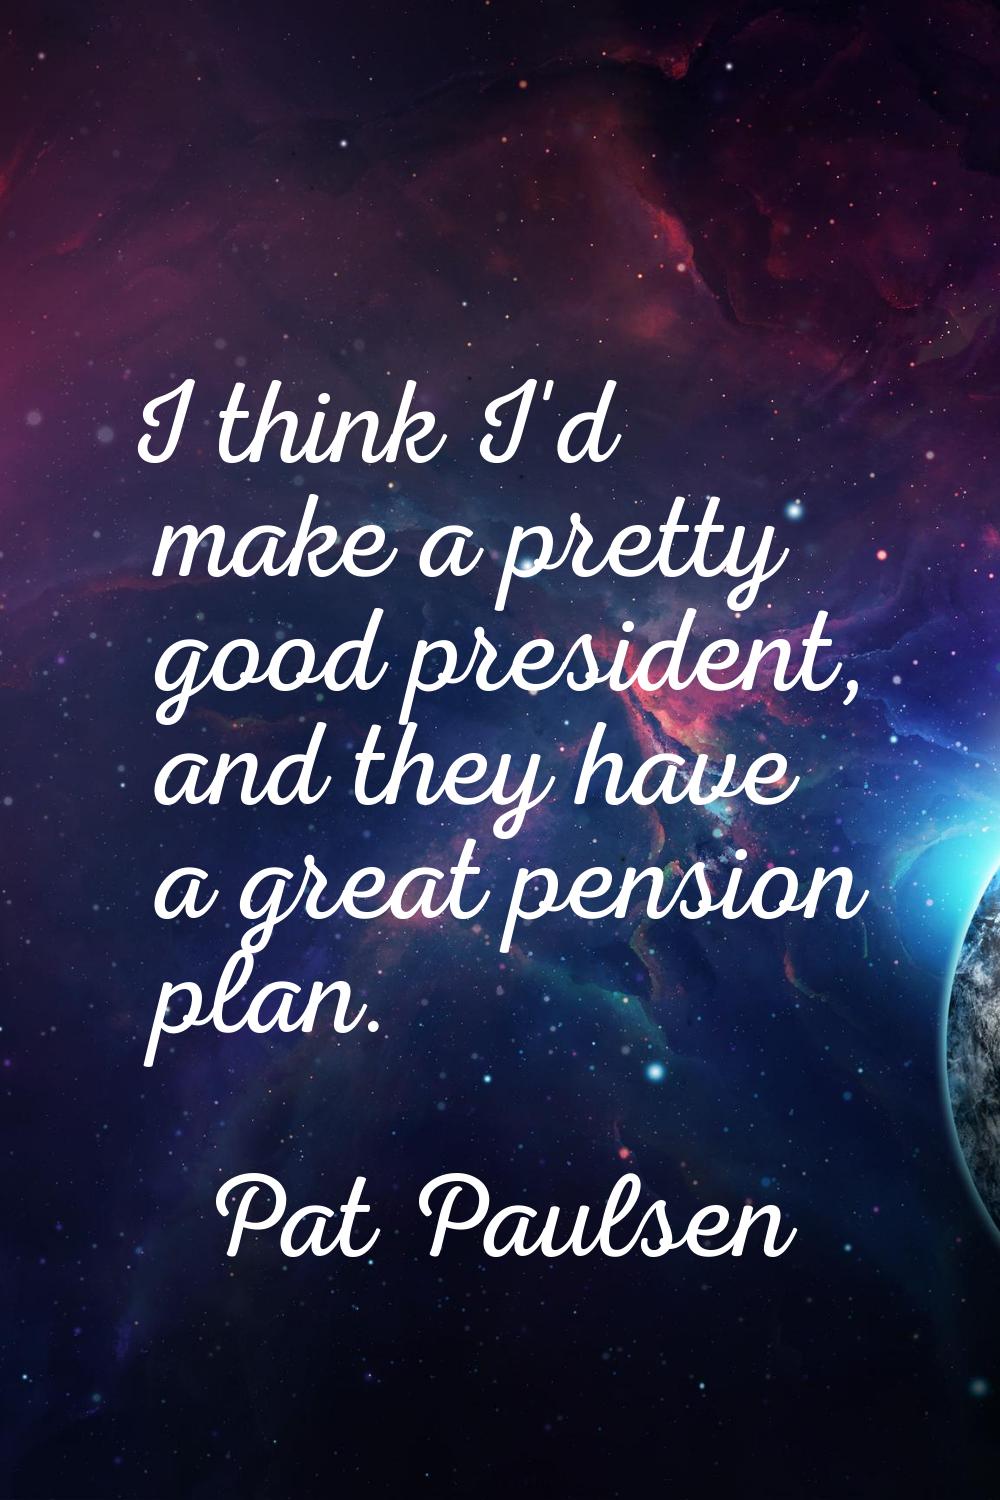 I think I'd make a pretty good president, and they have a great pension plan.